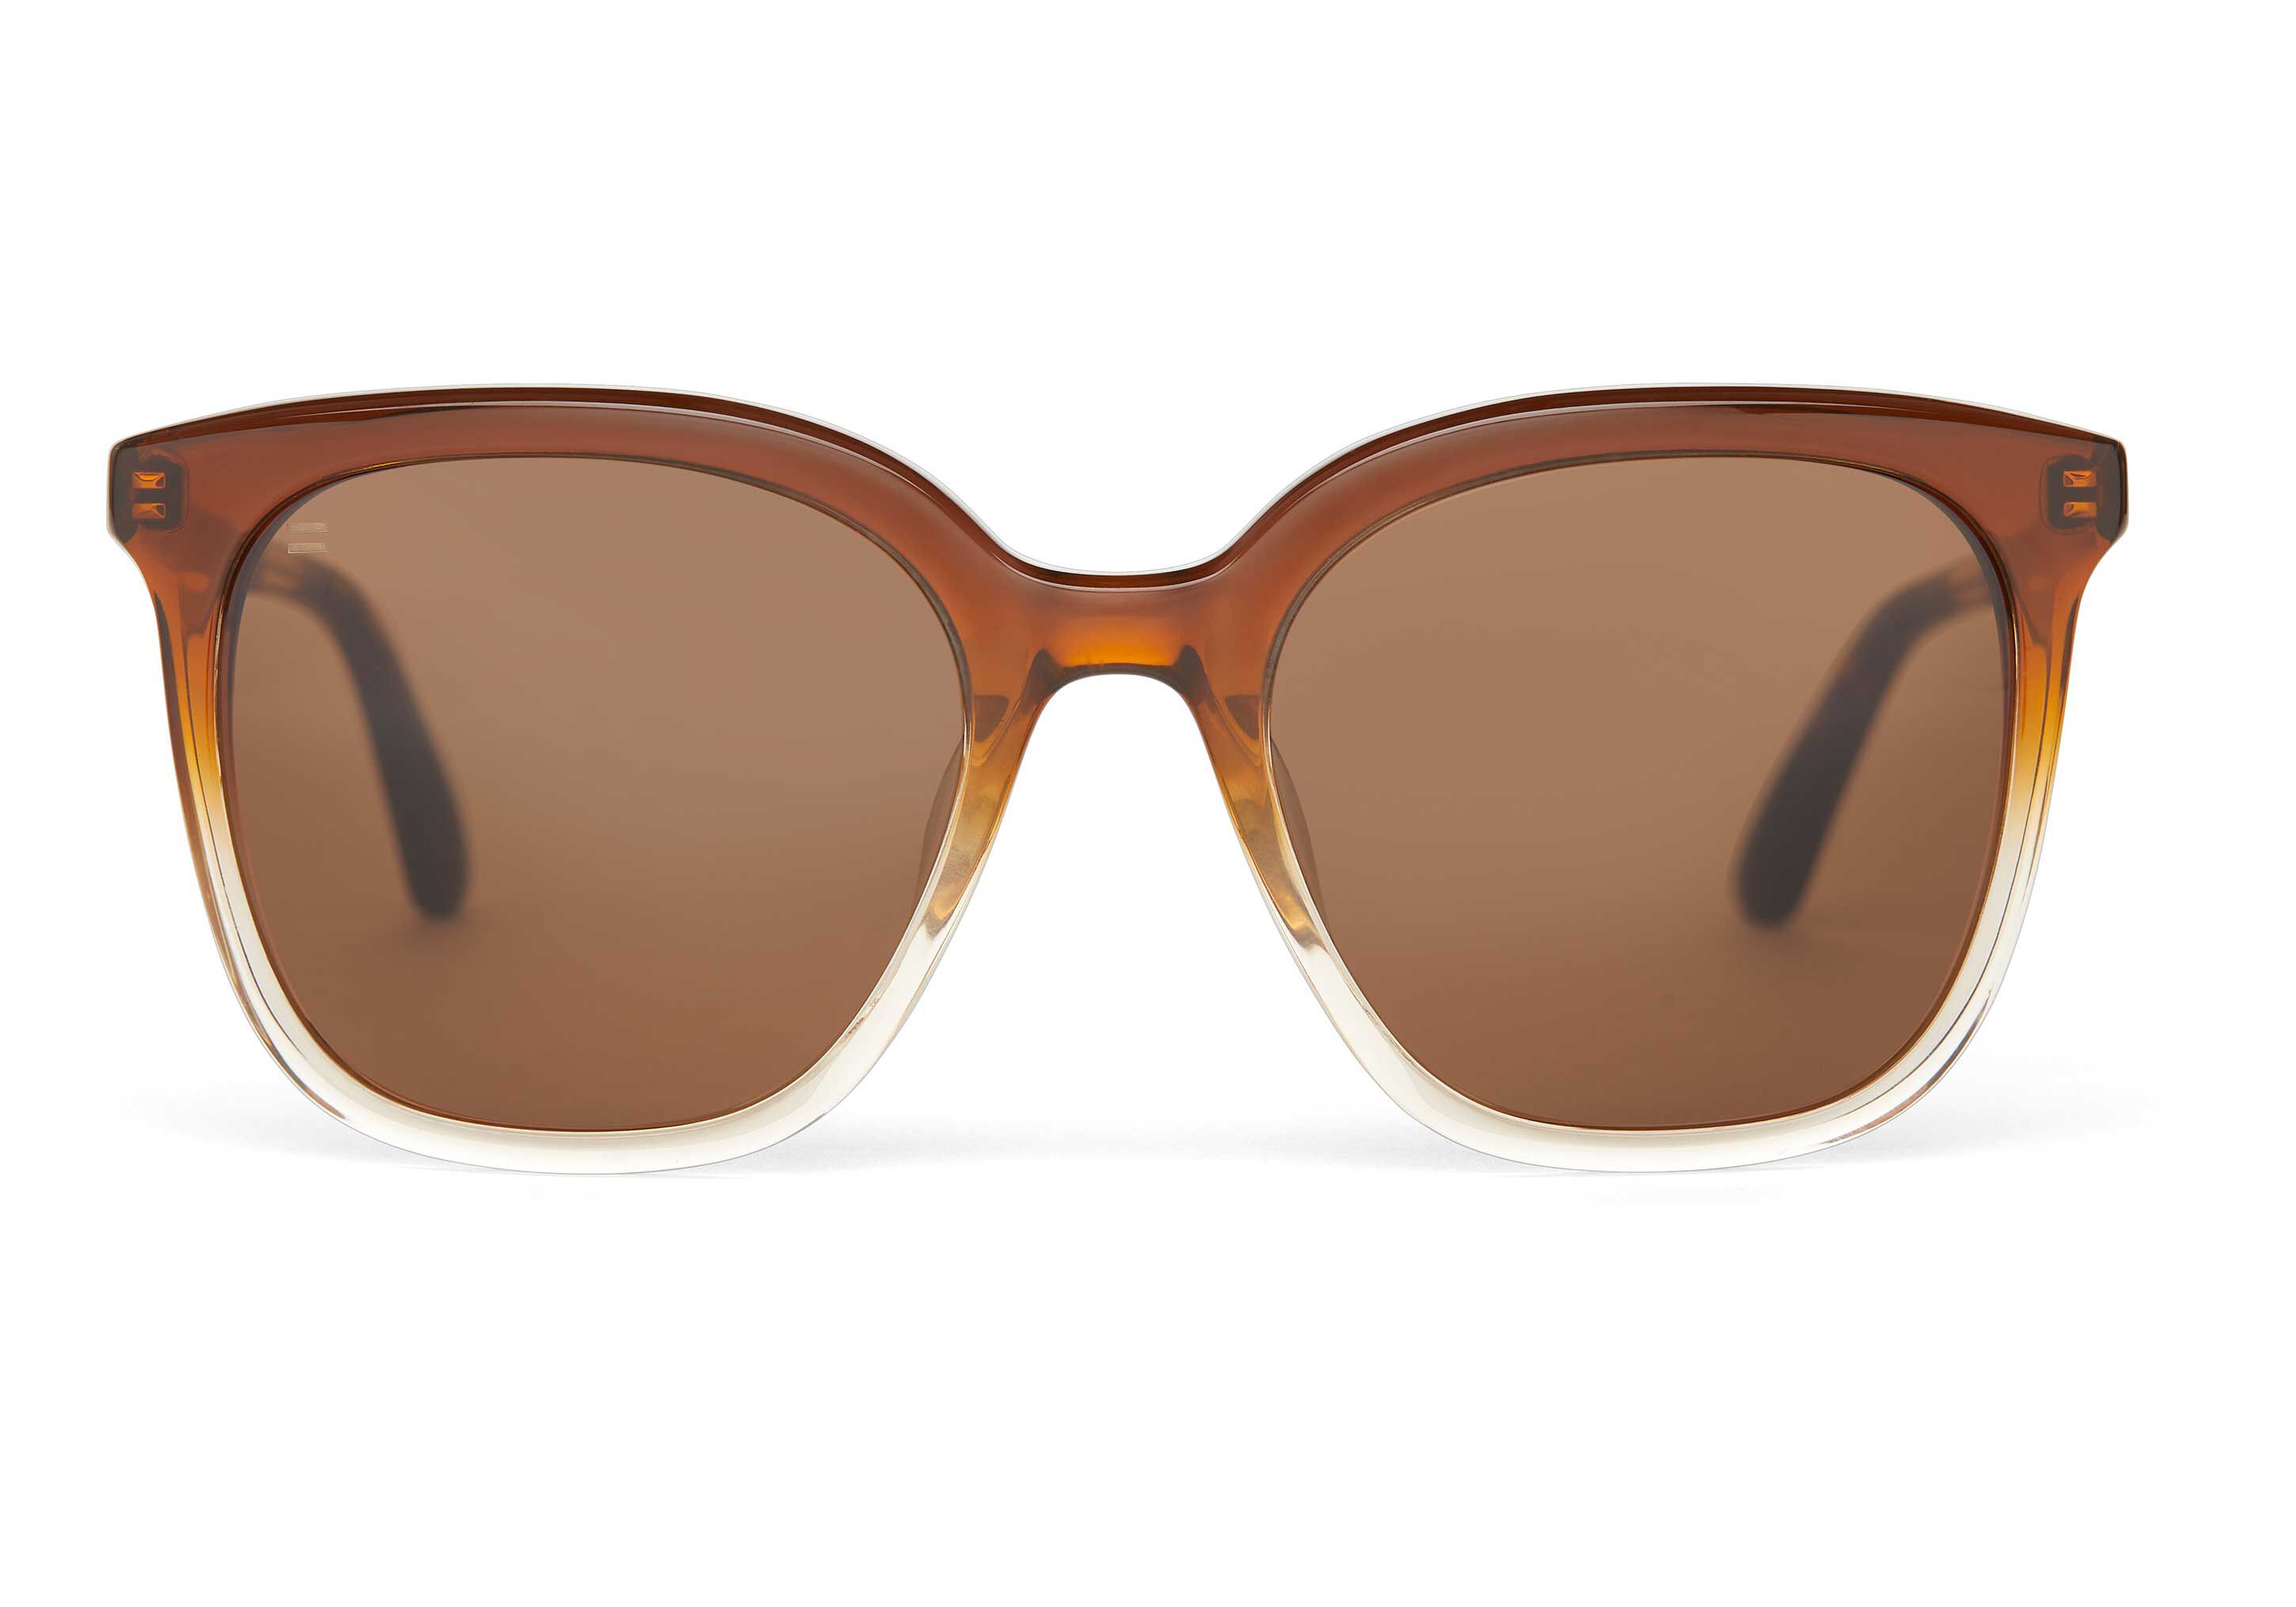 Sunglasses for wide heads, the reviews are in! – Faded Days Sunglasses